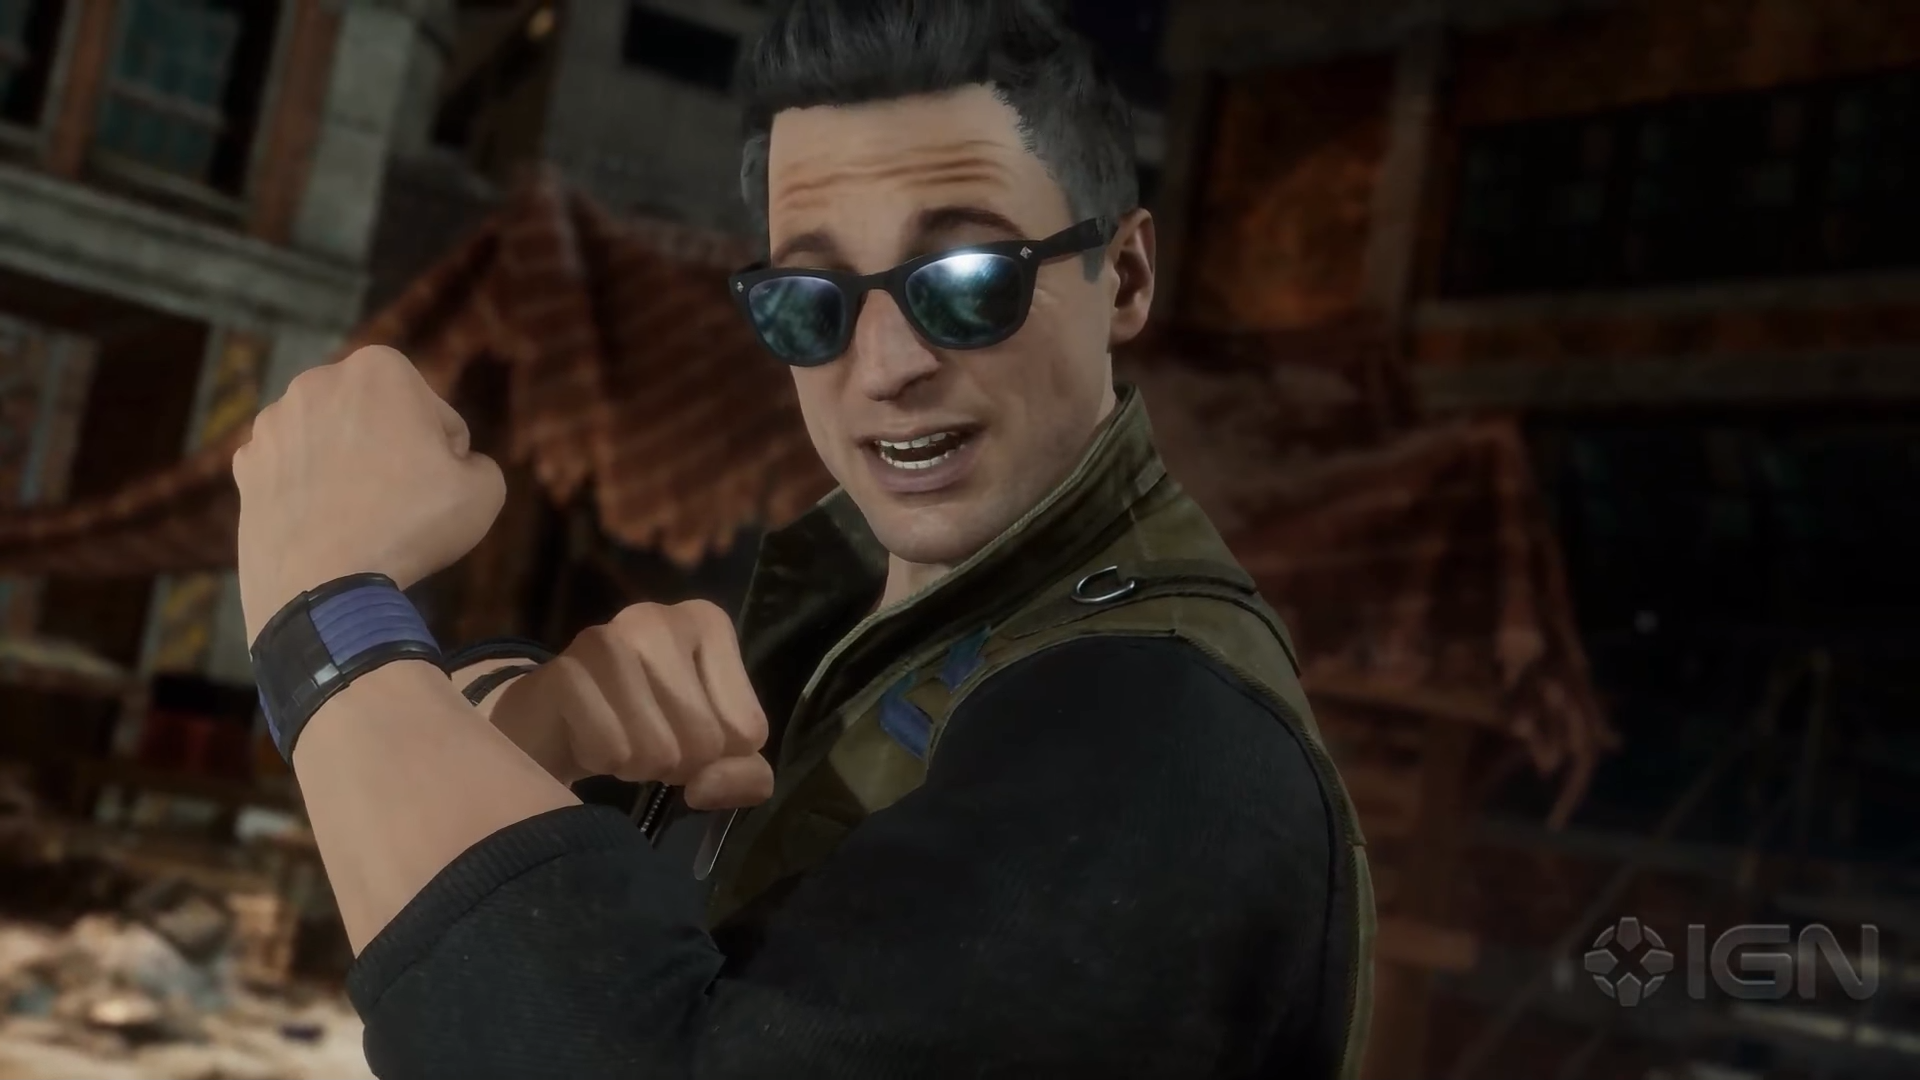 Johnny Cage returns for his latest role in Mortal Kombat 11